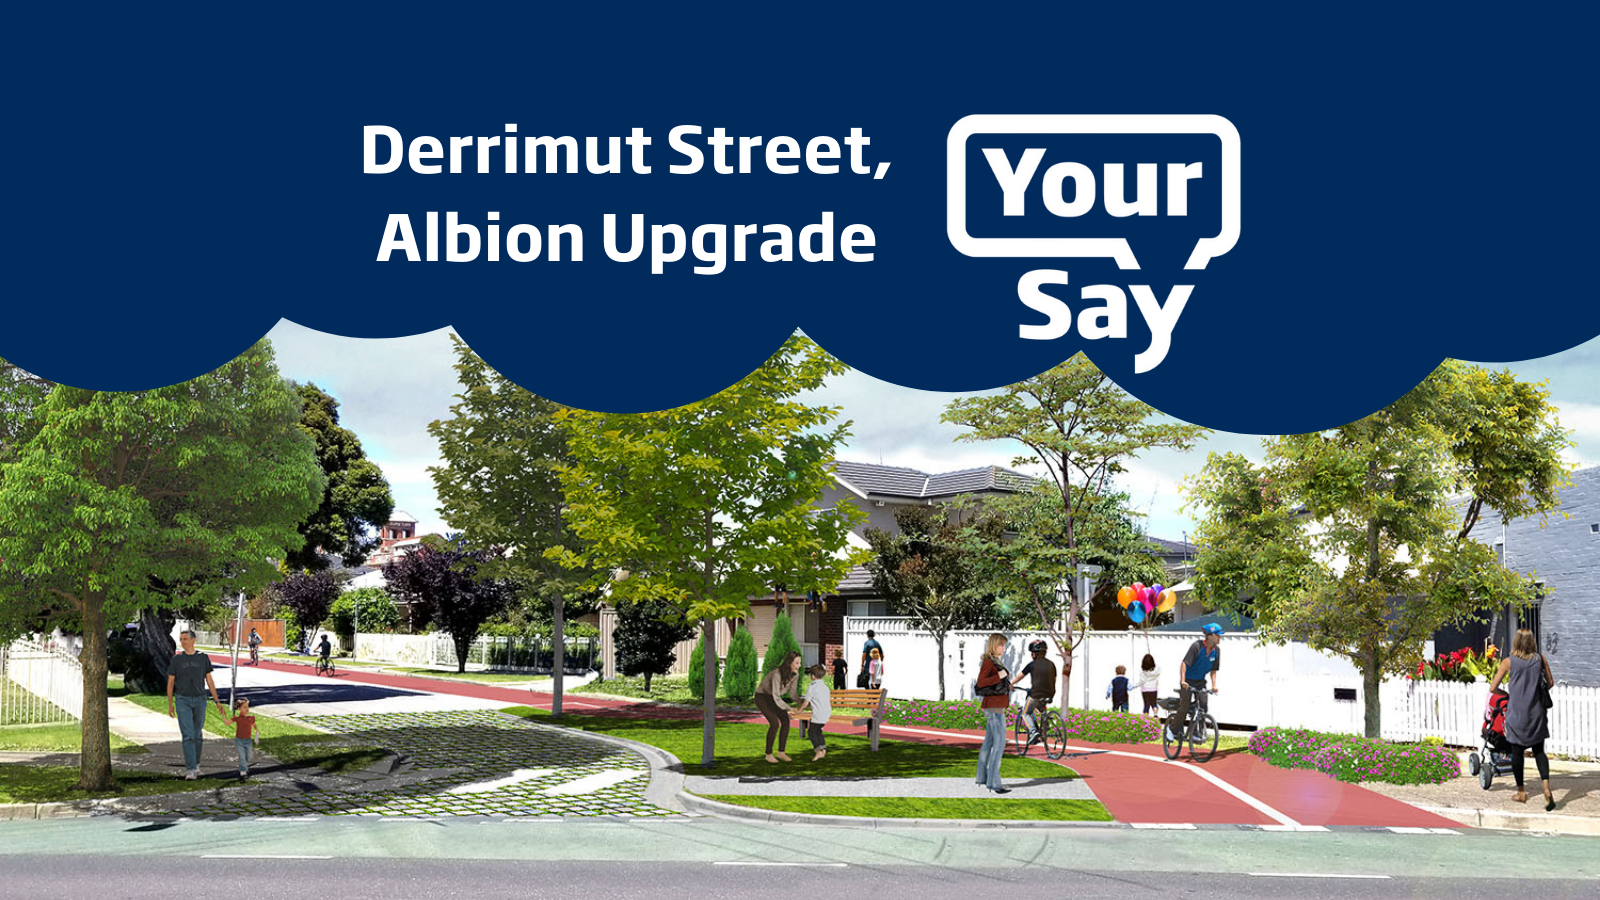 Artists impression of one option for the upgrade of Derrimut Street, Albion